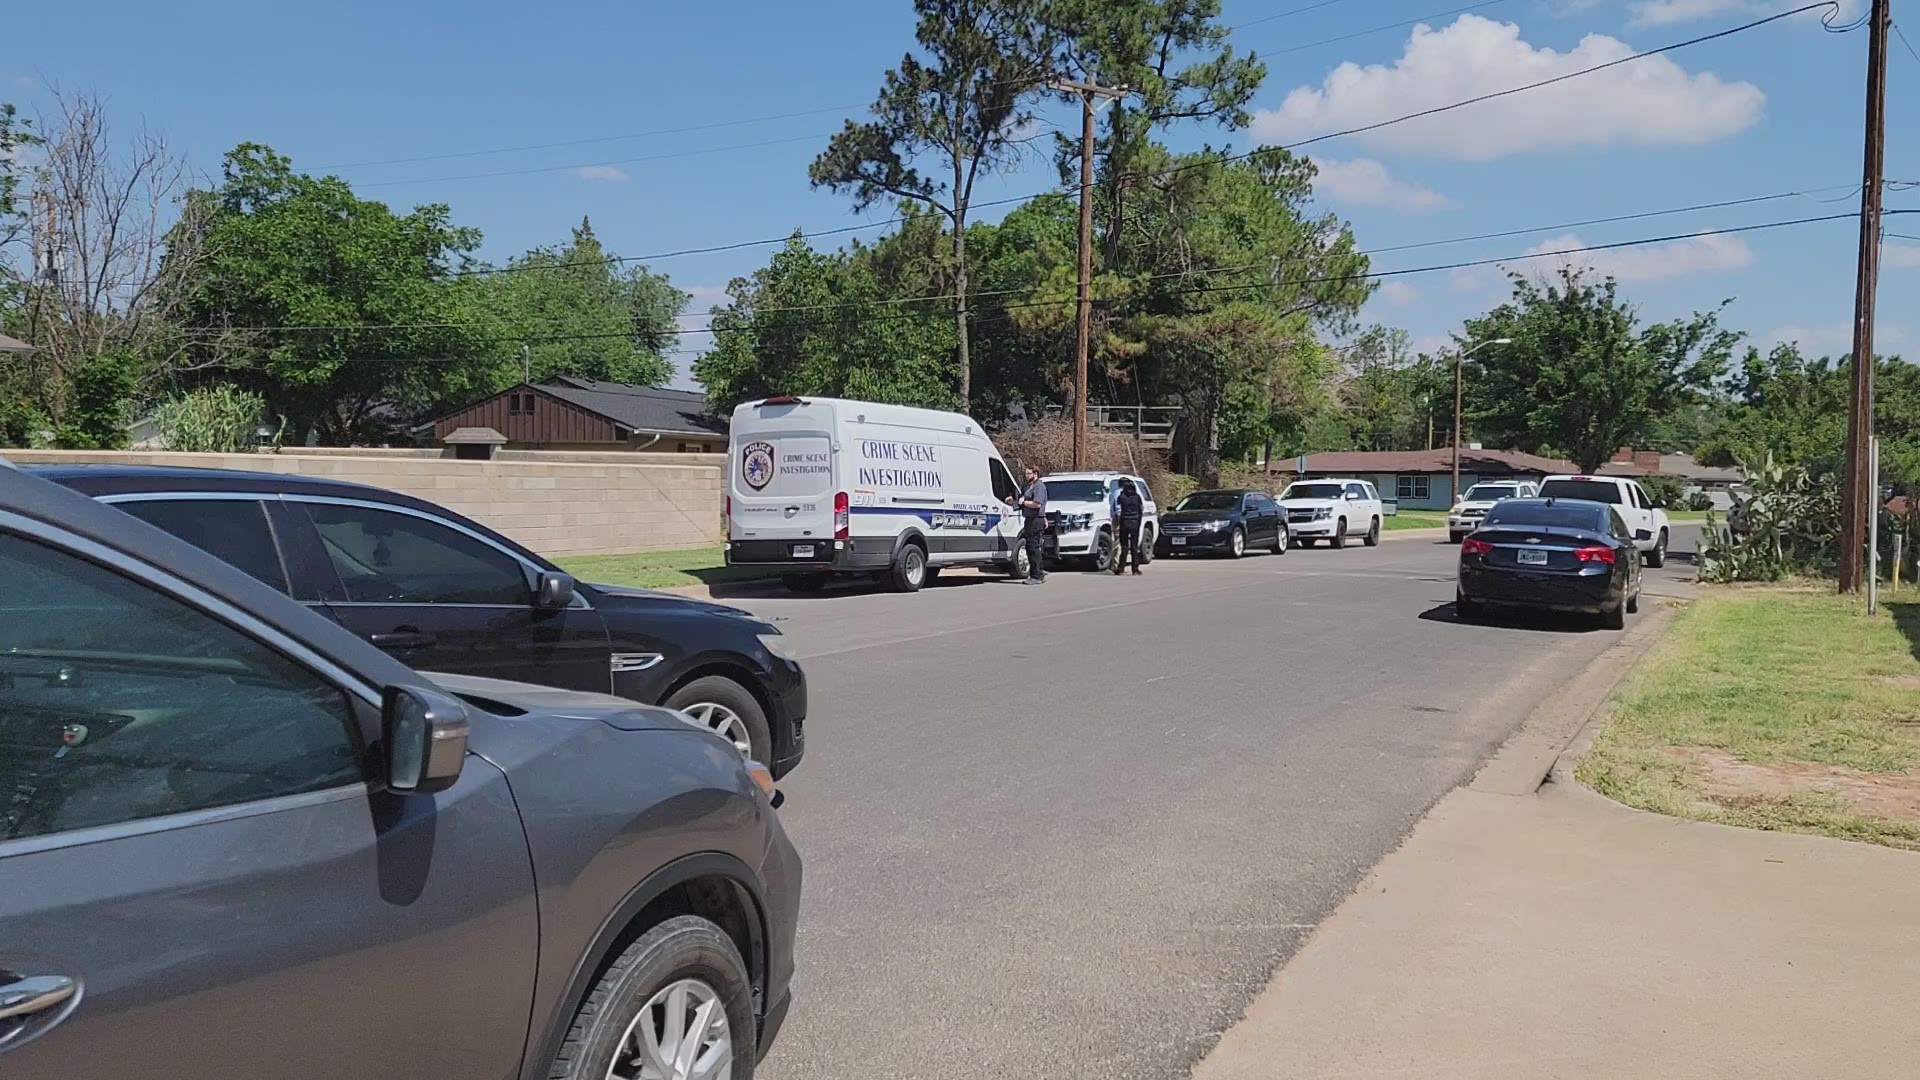 MPD is investigating after a deceased man was found in the area of Louisiana and Broadway.